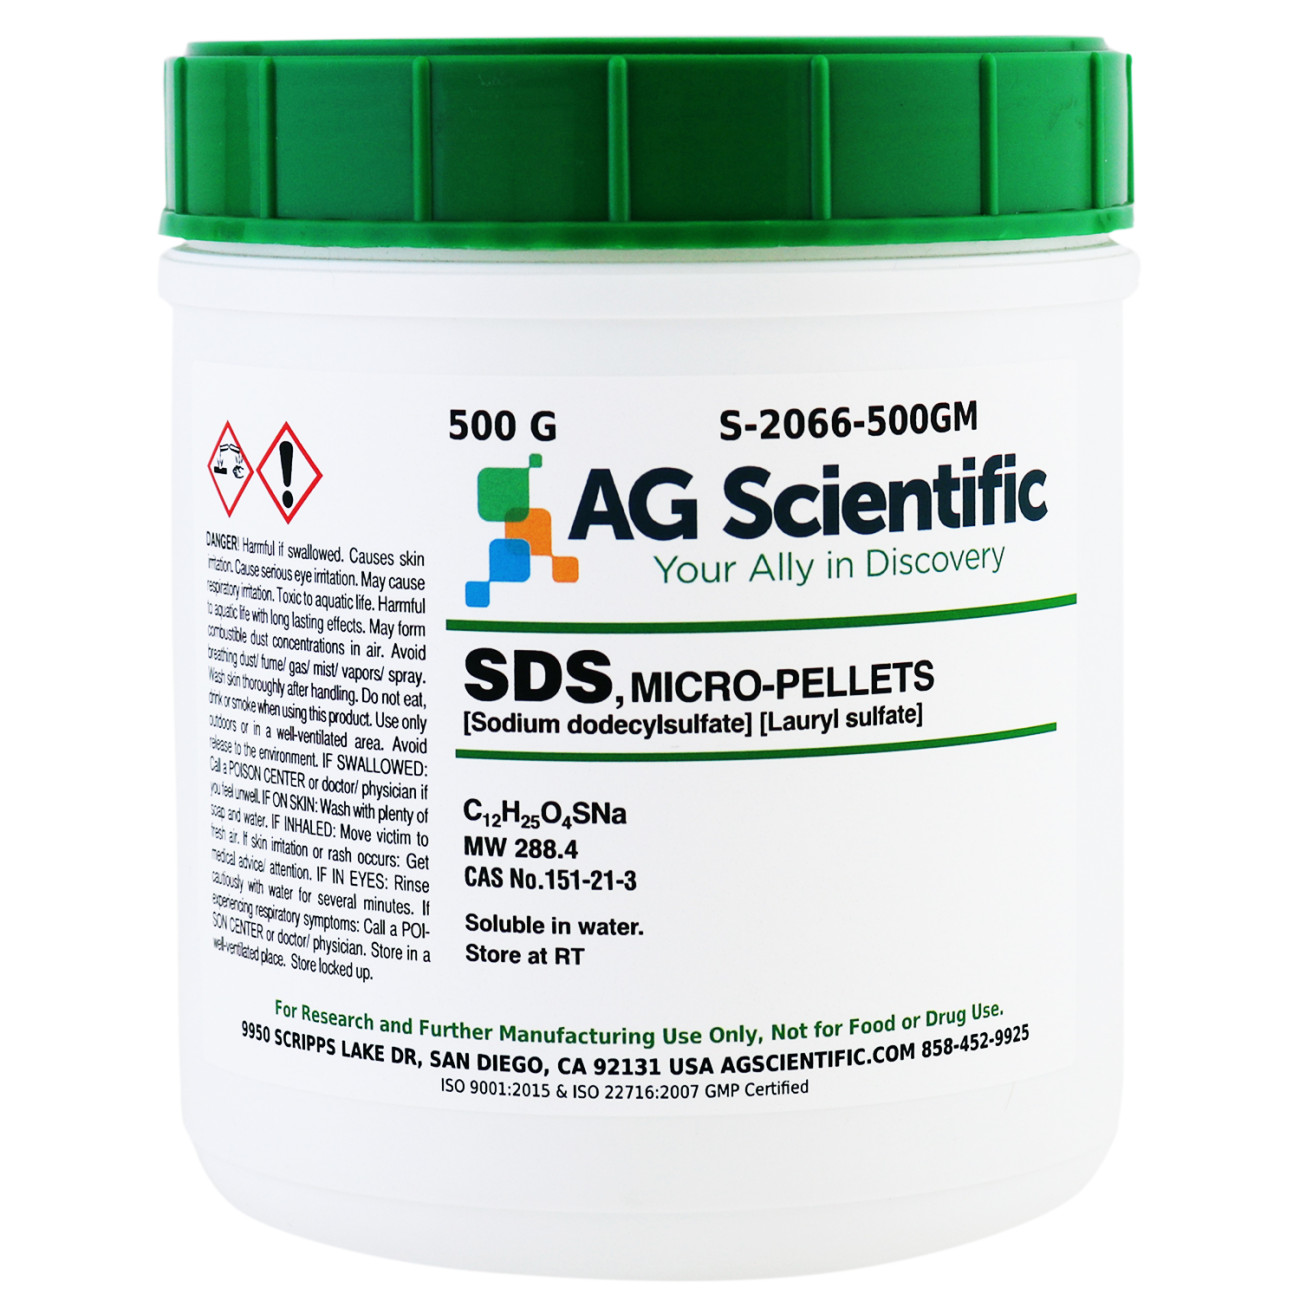 SDS [Sodium Dodecyl Sulfate], Micro-Pellets, 500 G